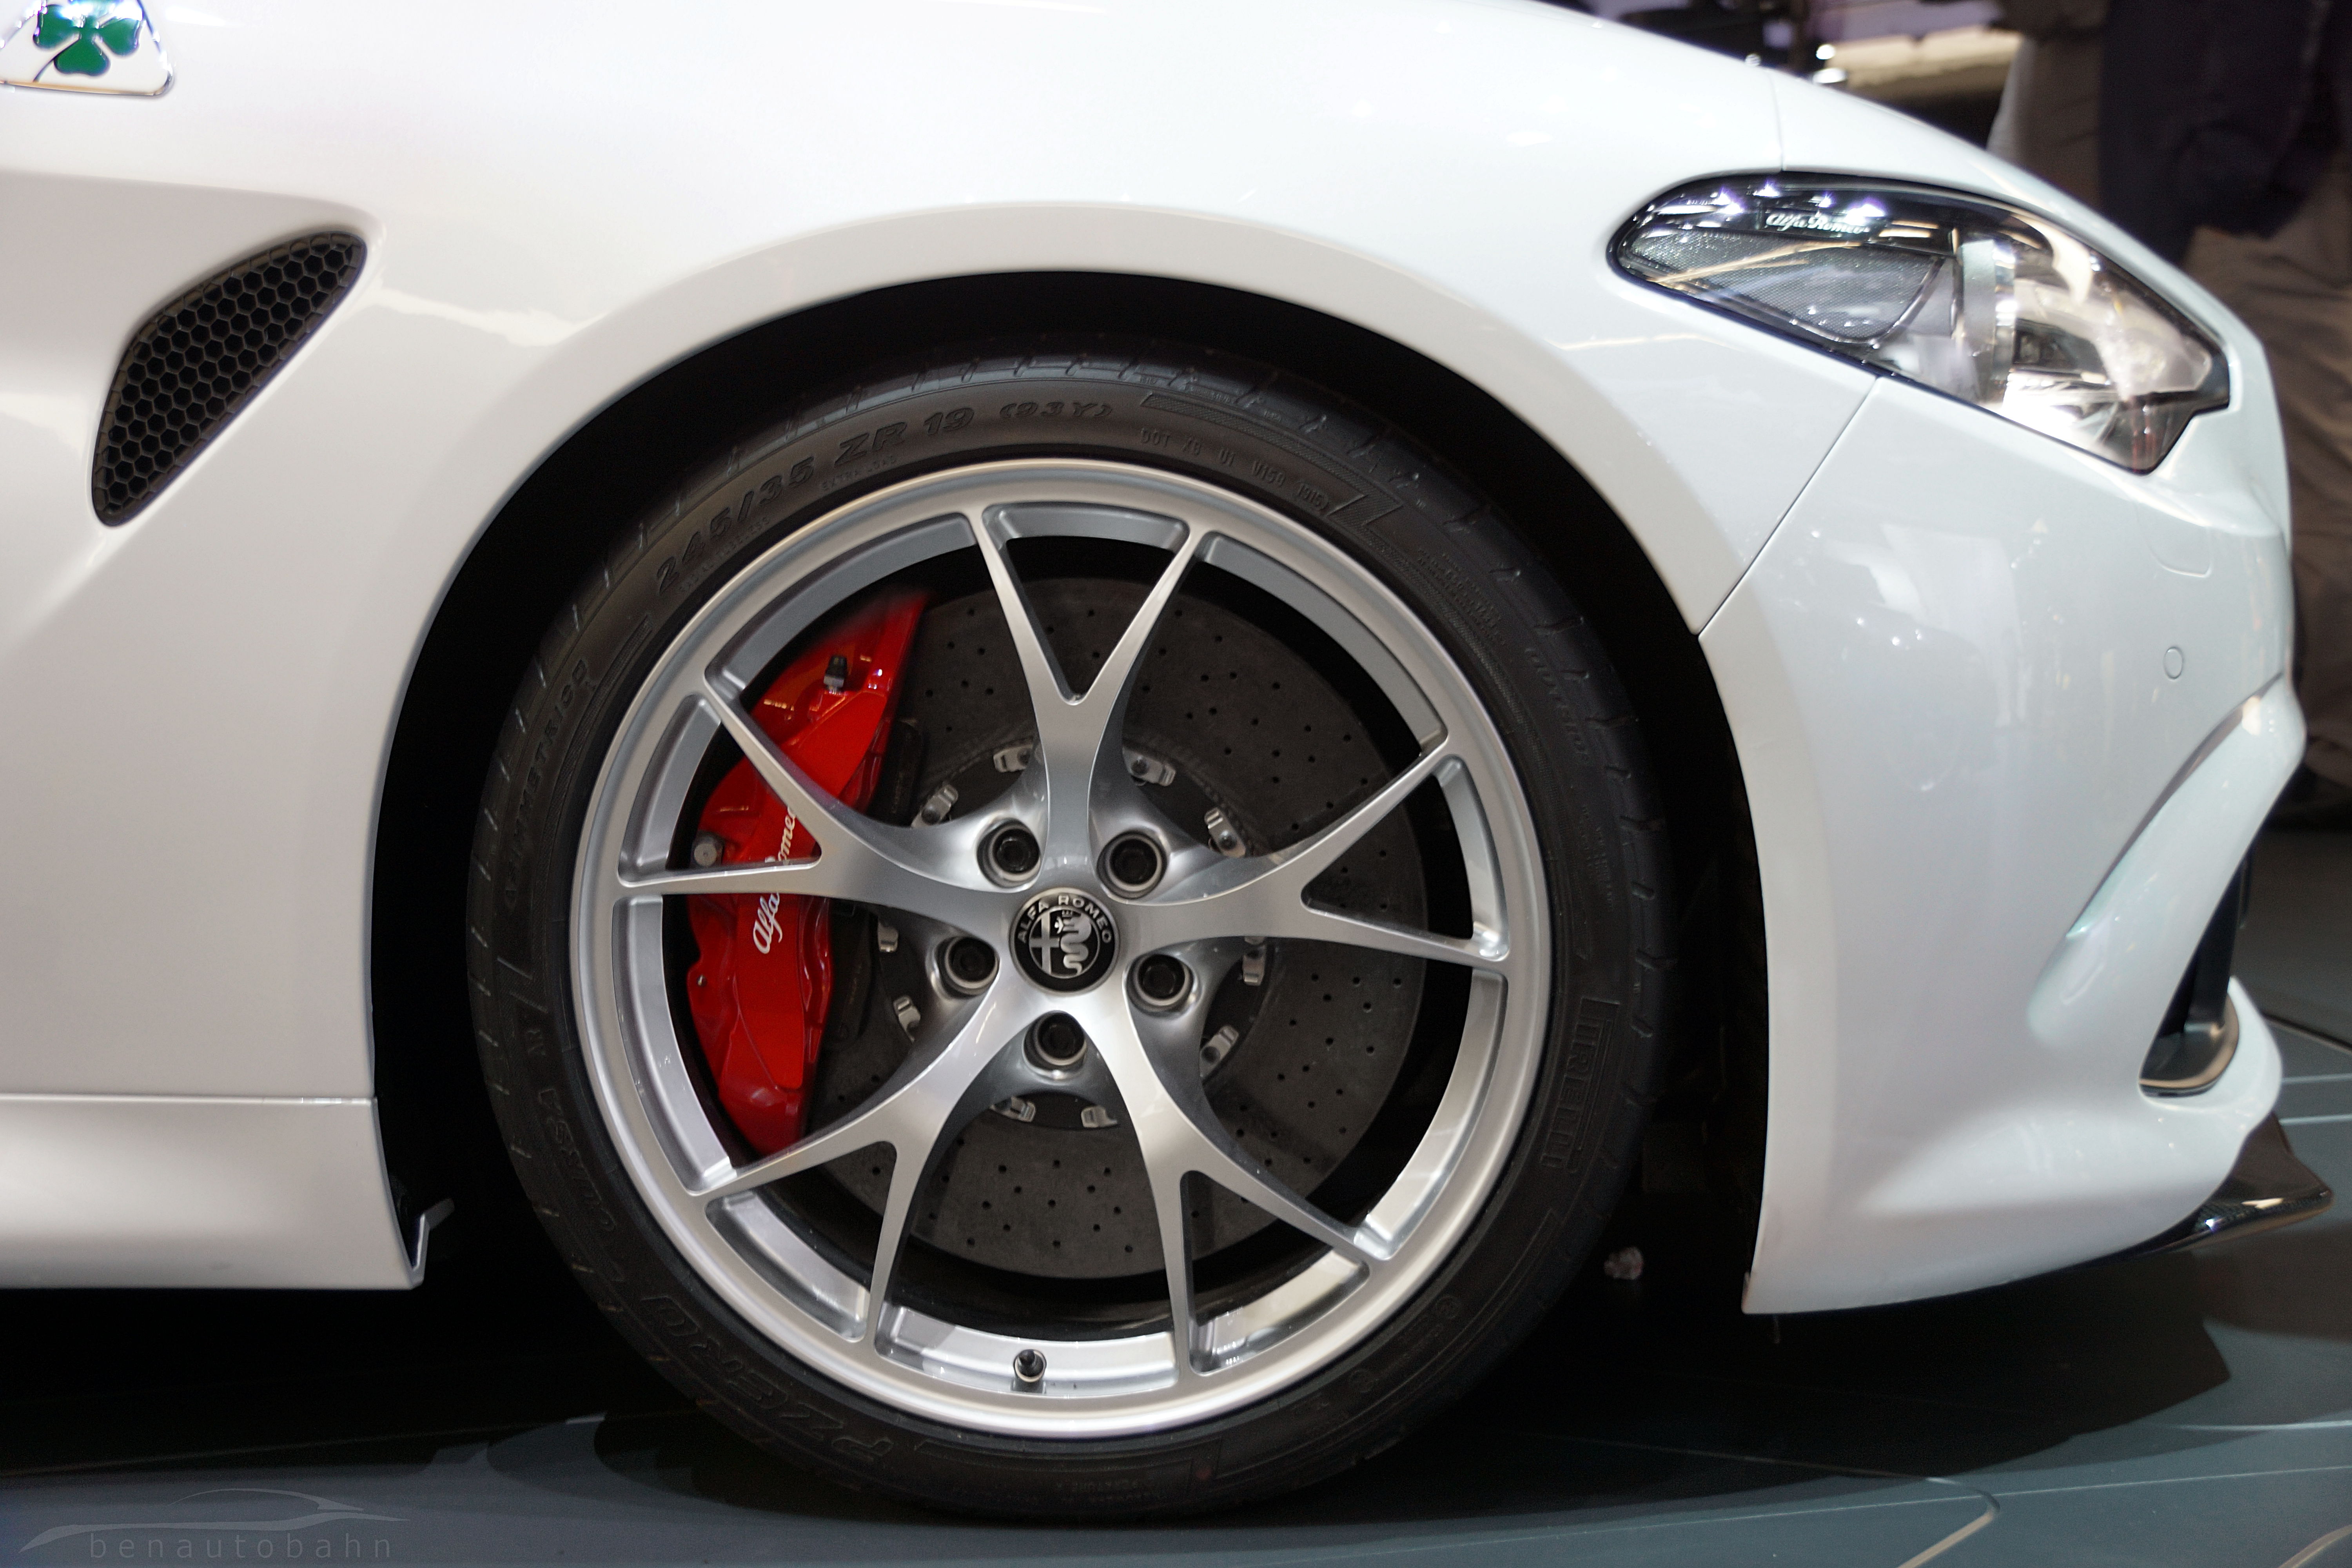 Just one of the many wheel choices. And boy does it have huge brakes.